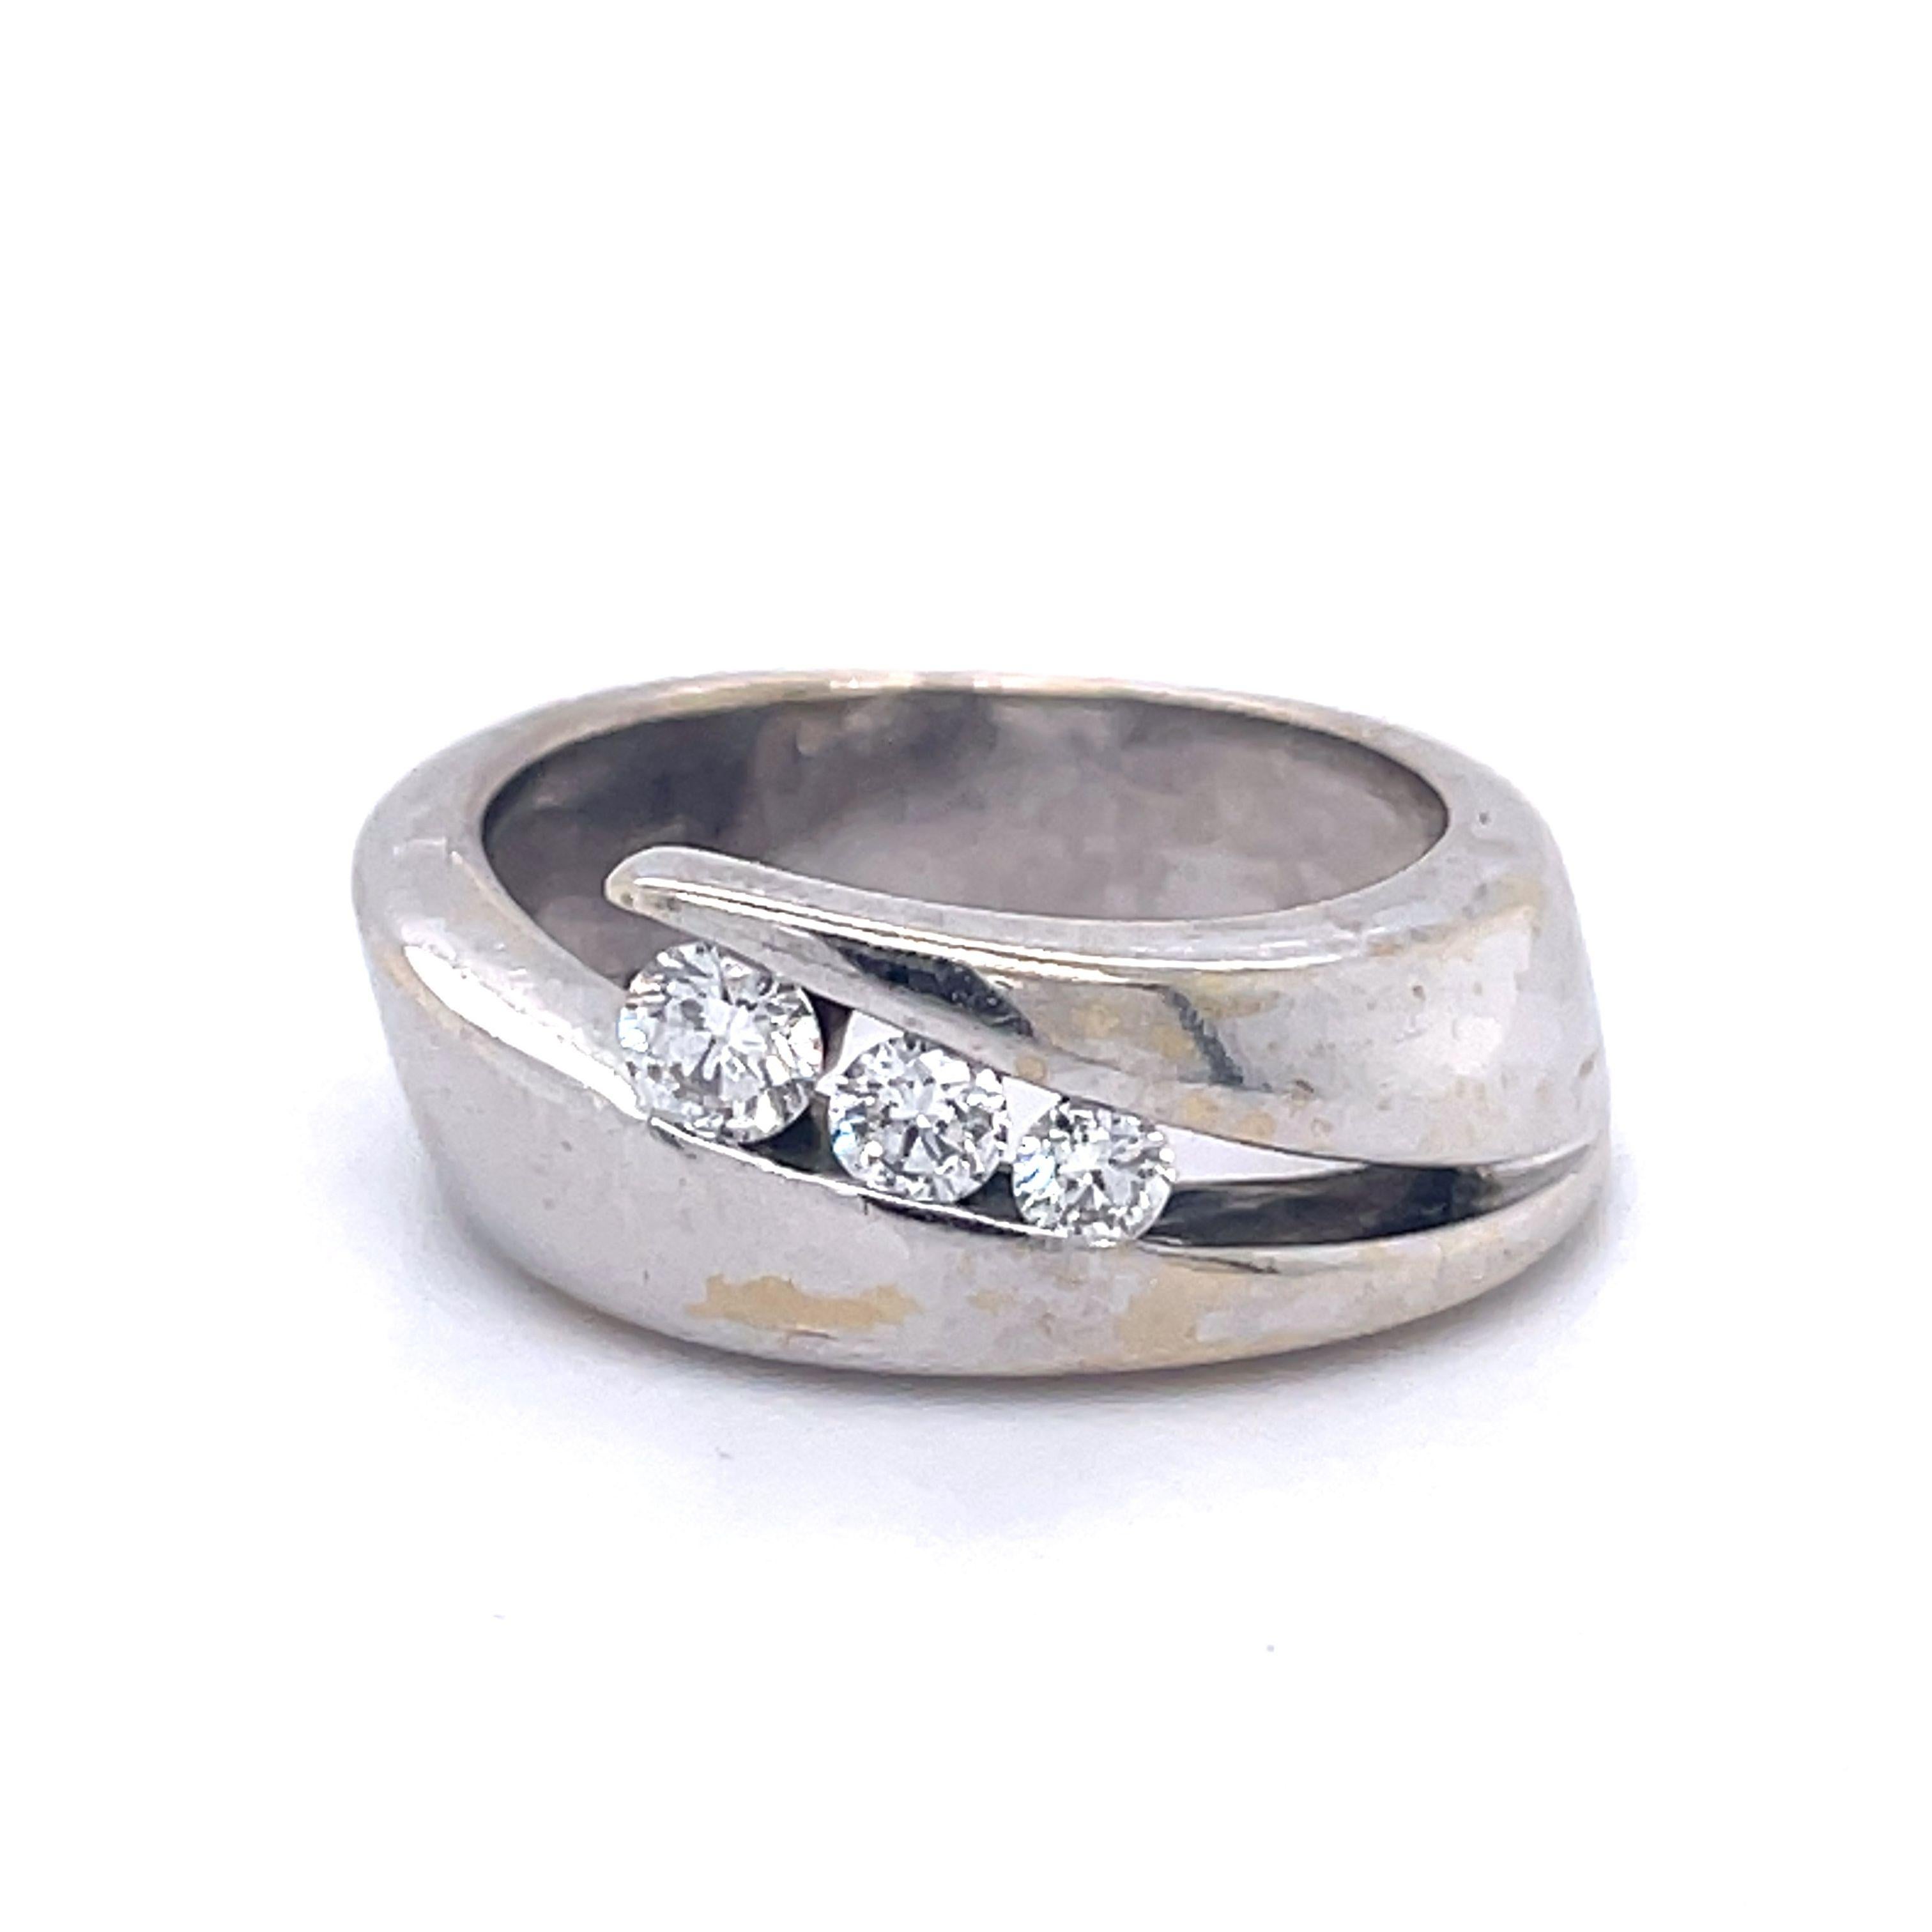 3 Diamonds Tention Ring -18K white gold, 0.3ct netural diamonds, vintage ring For Sale 2